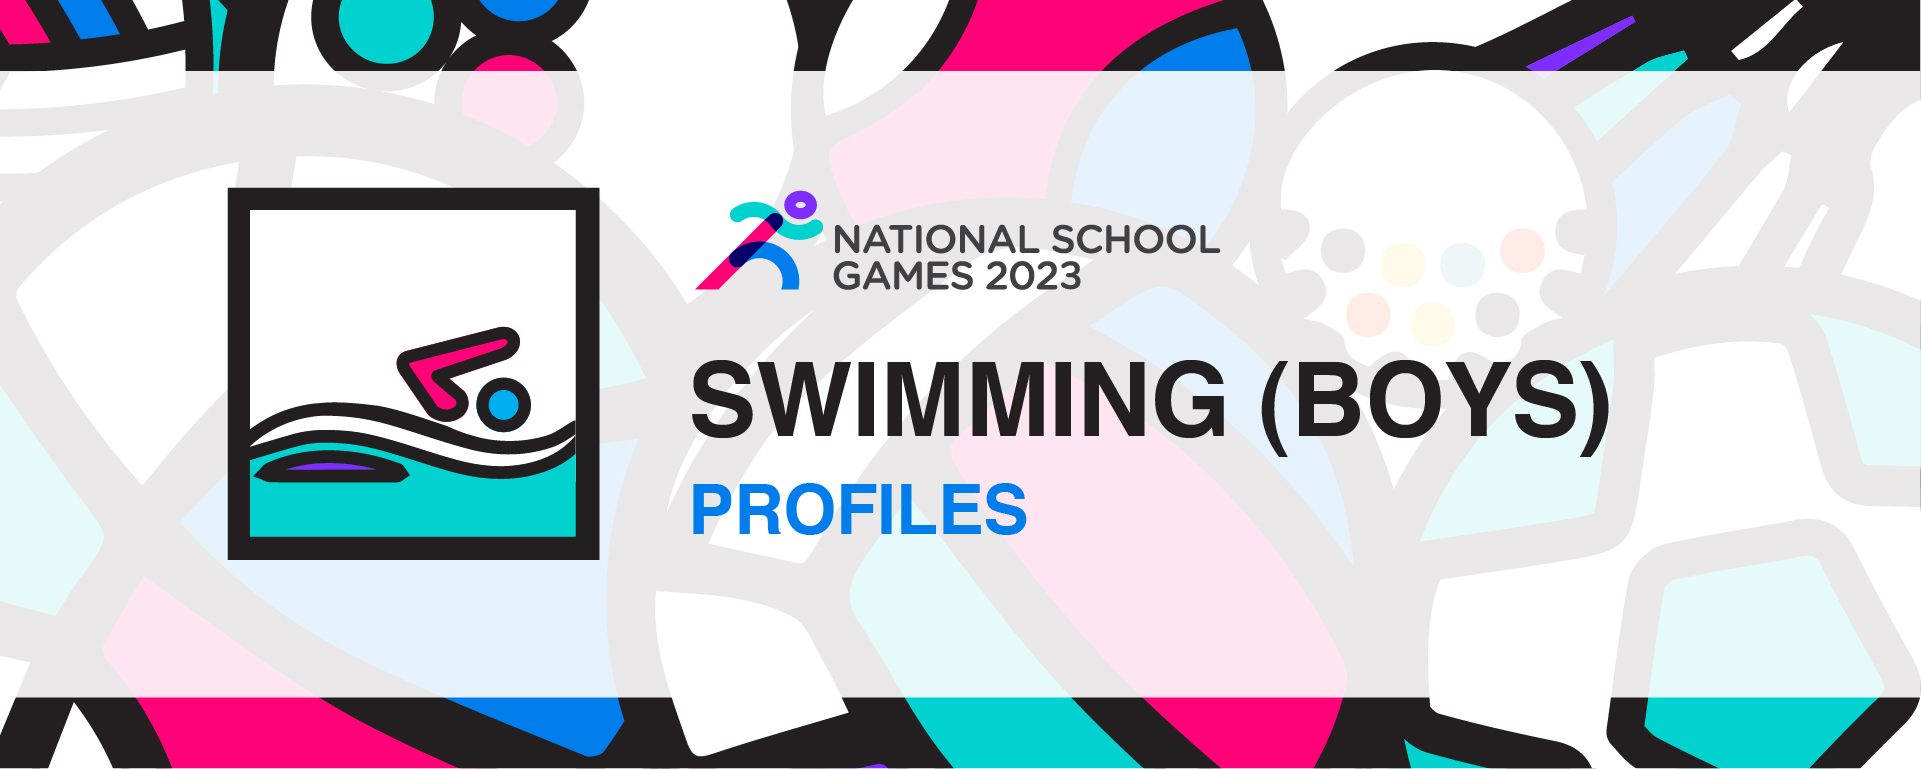 National School Games 2023 | Swimming | Profile